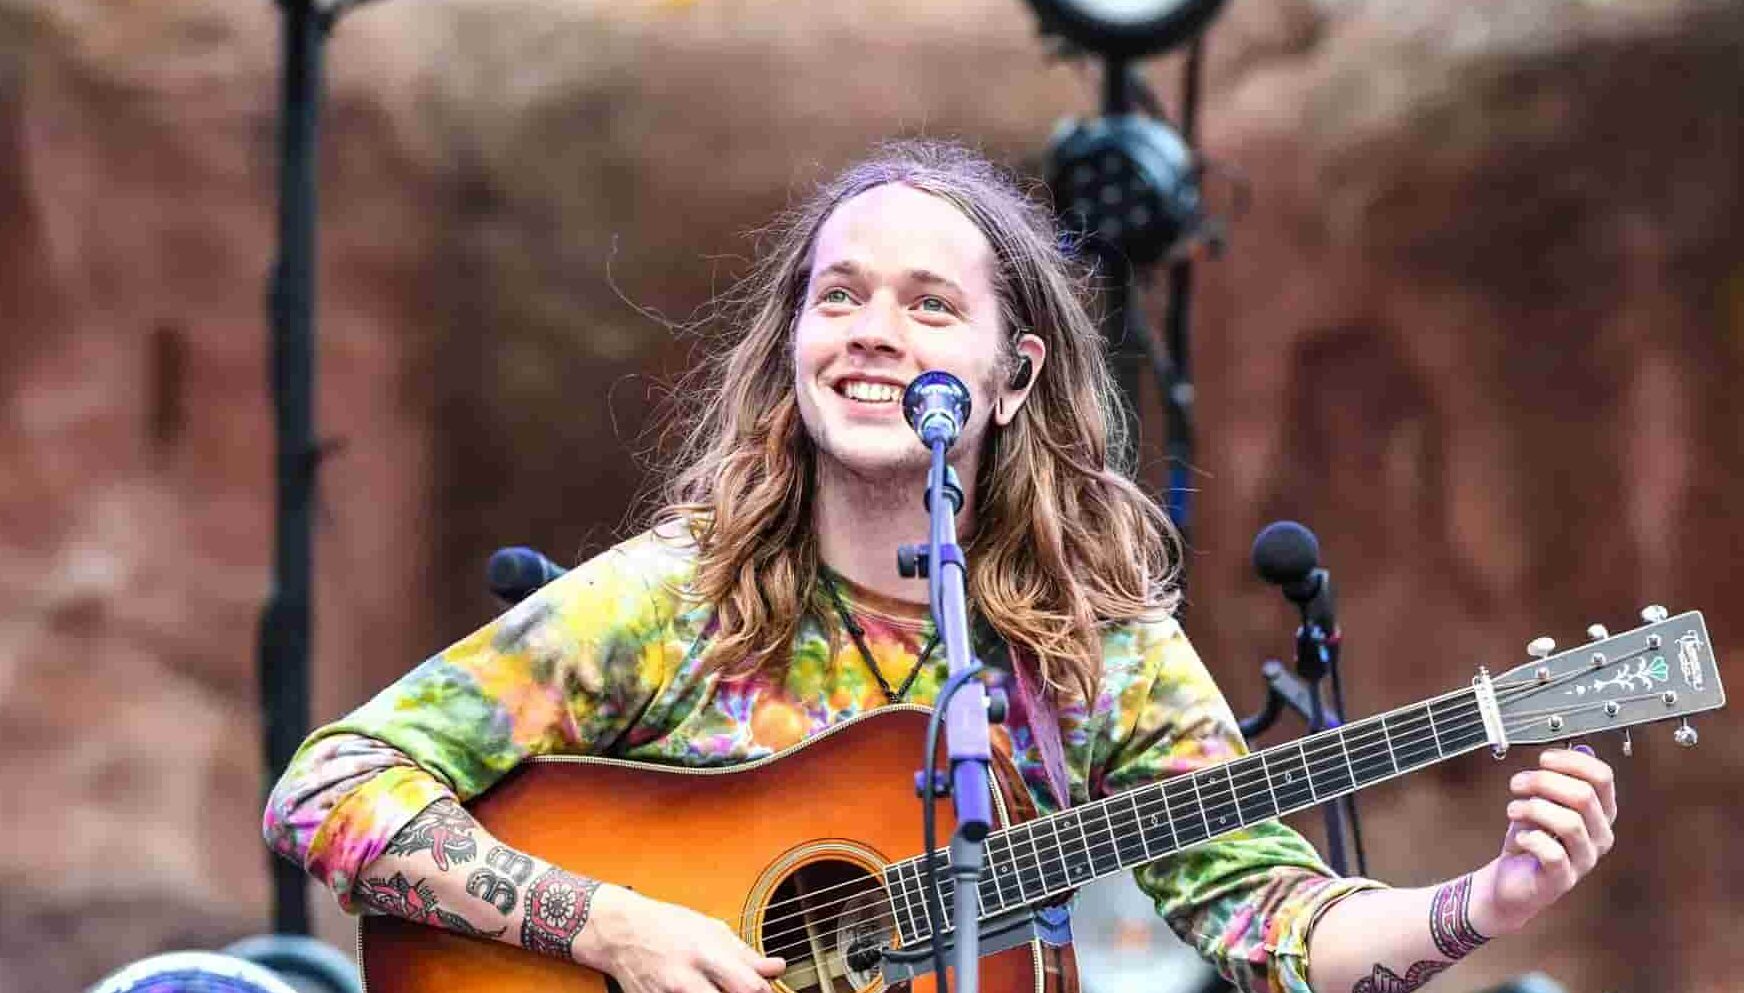 Image of Billy Strings as a singer amd his visible tattoos